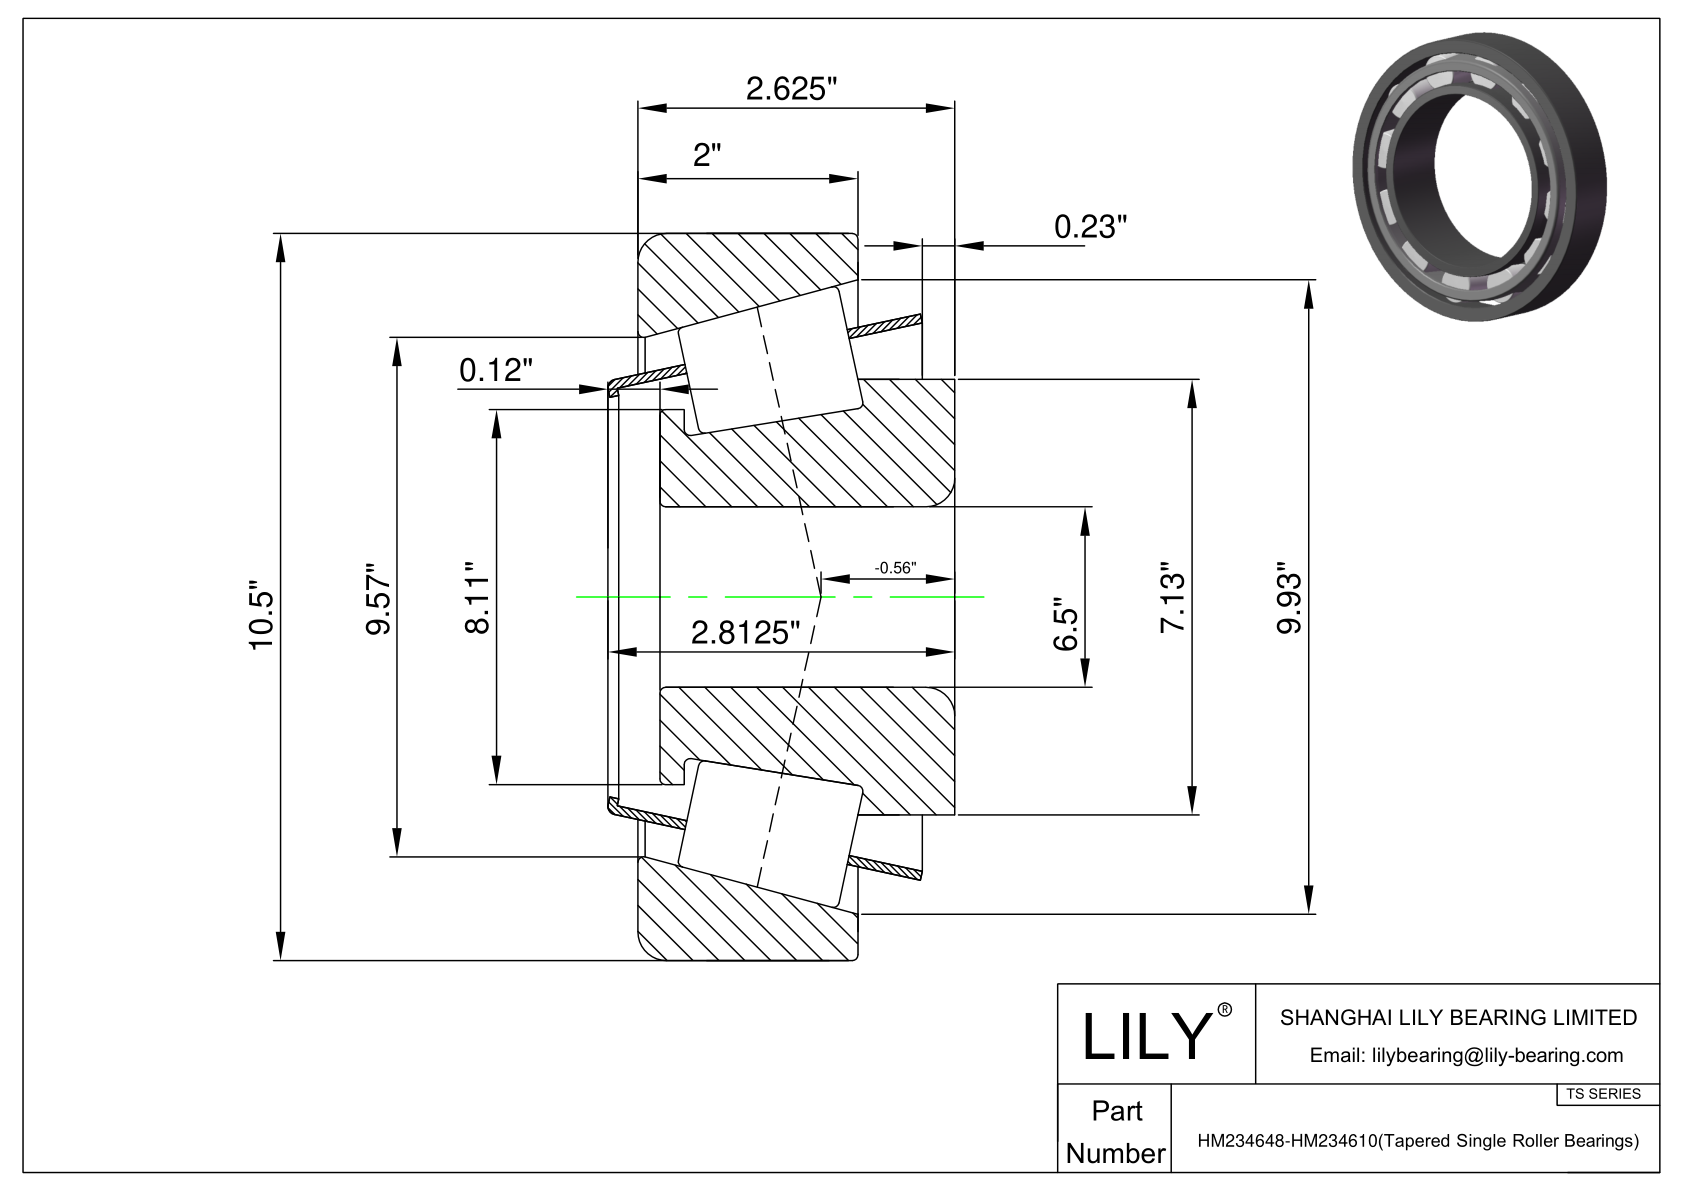 HM234648-HM234610 TS (Tapered Single Roller Bearings) (Imperial) cad drawing